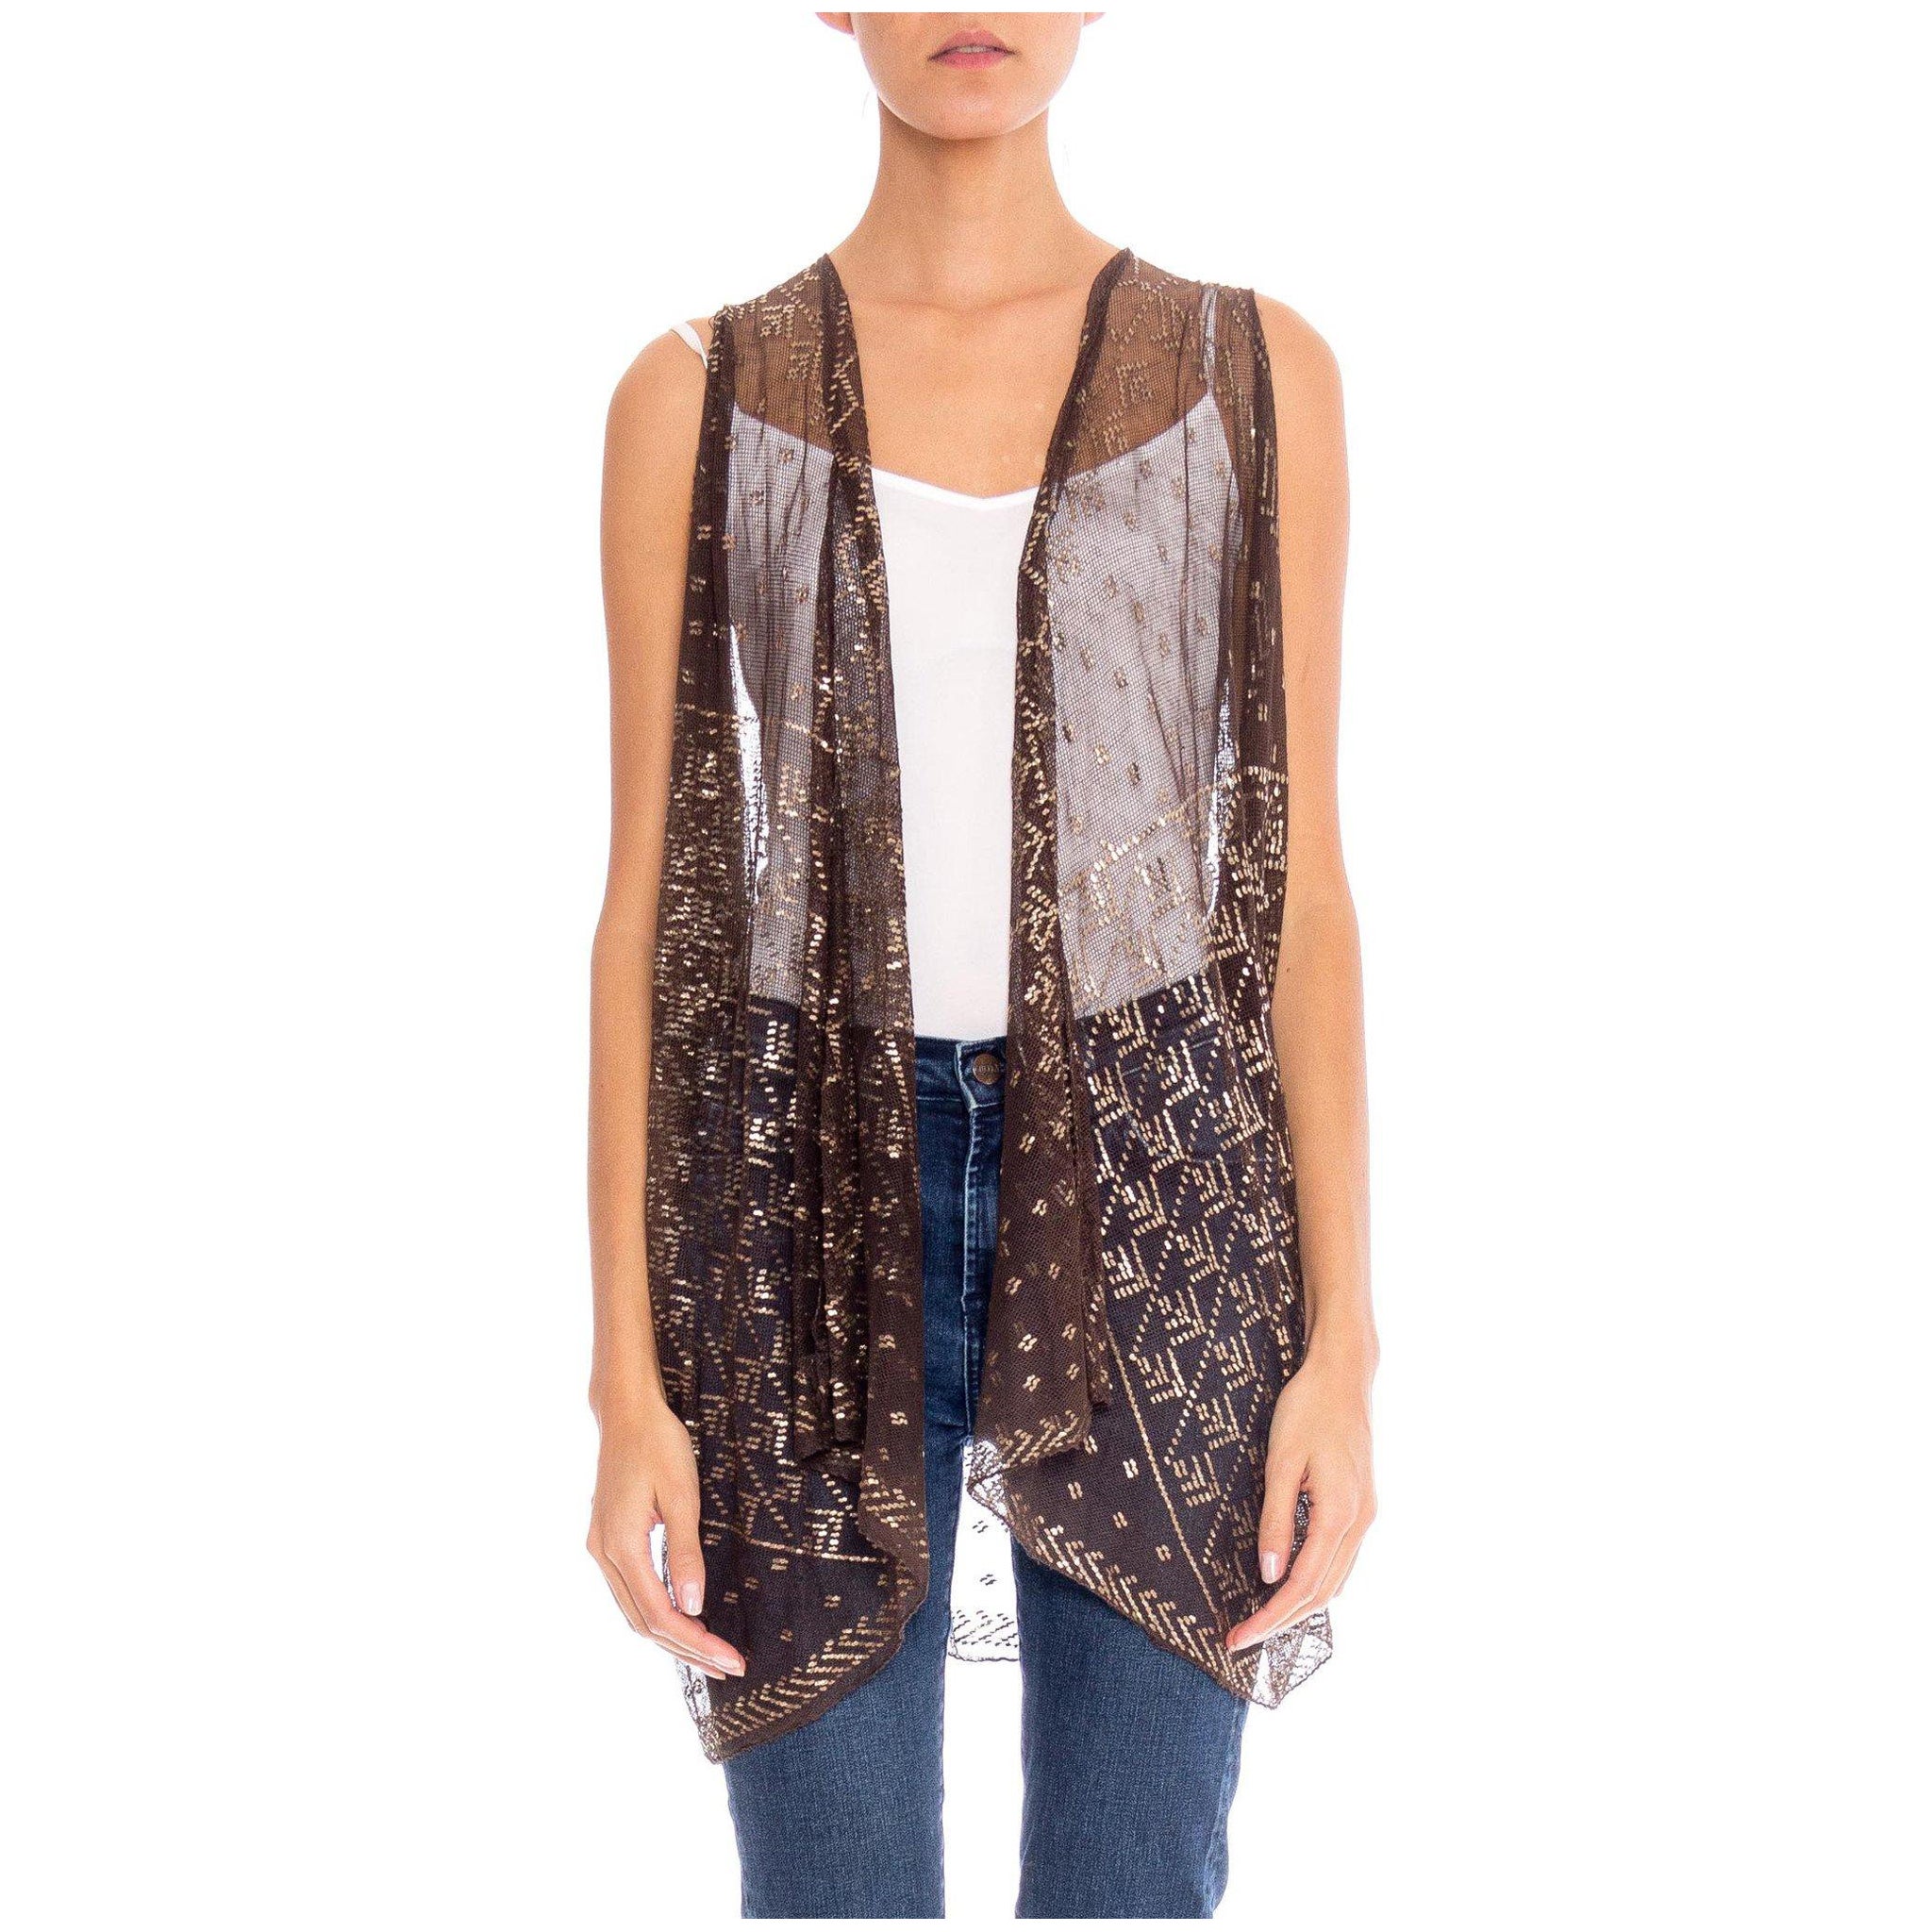 MORPHEW COLLECTION Chocolate Brown & Silver Egyptian Assuit Sheer Draped Vest For Sale